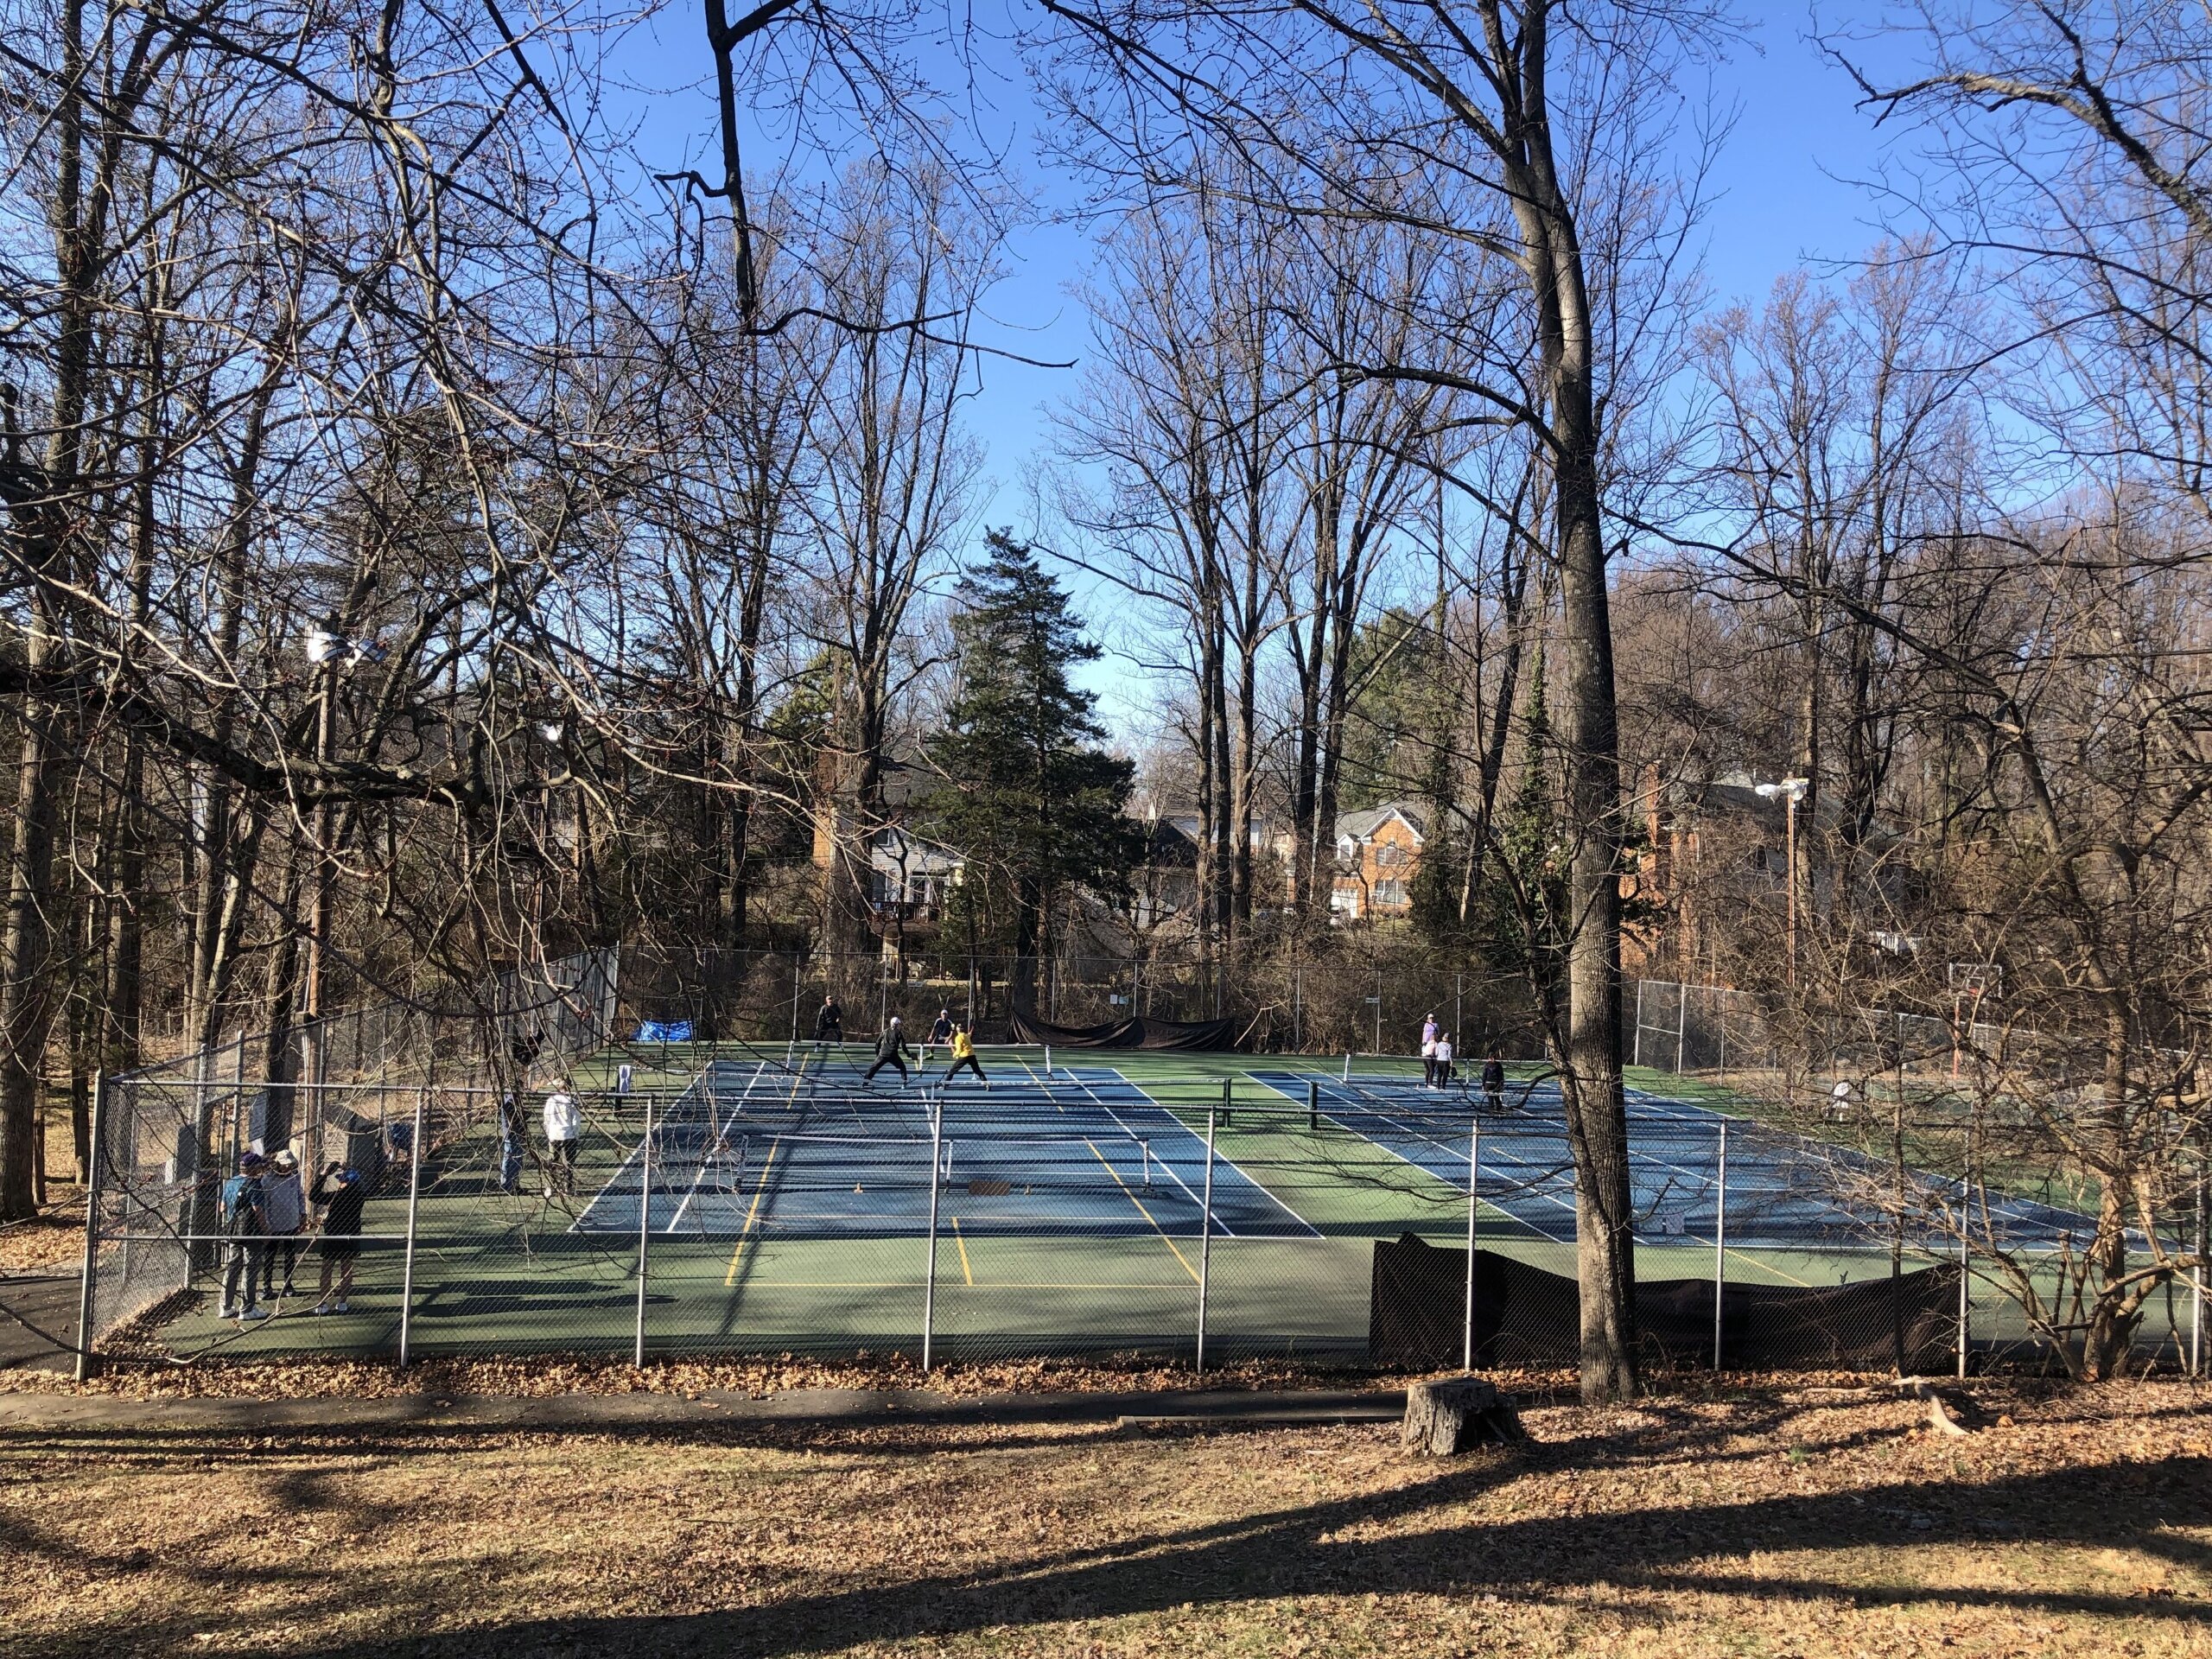 Vienna limits pickleball play because of noise